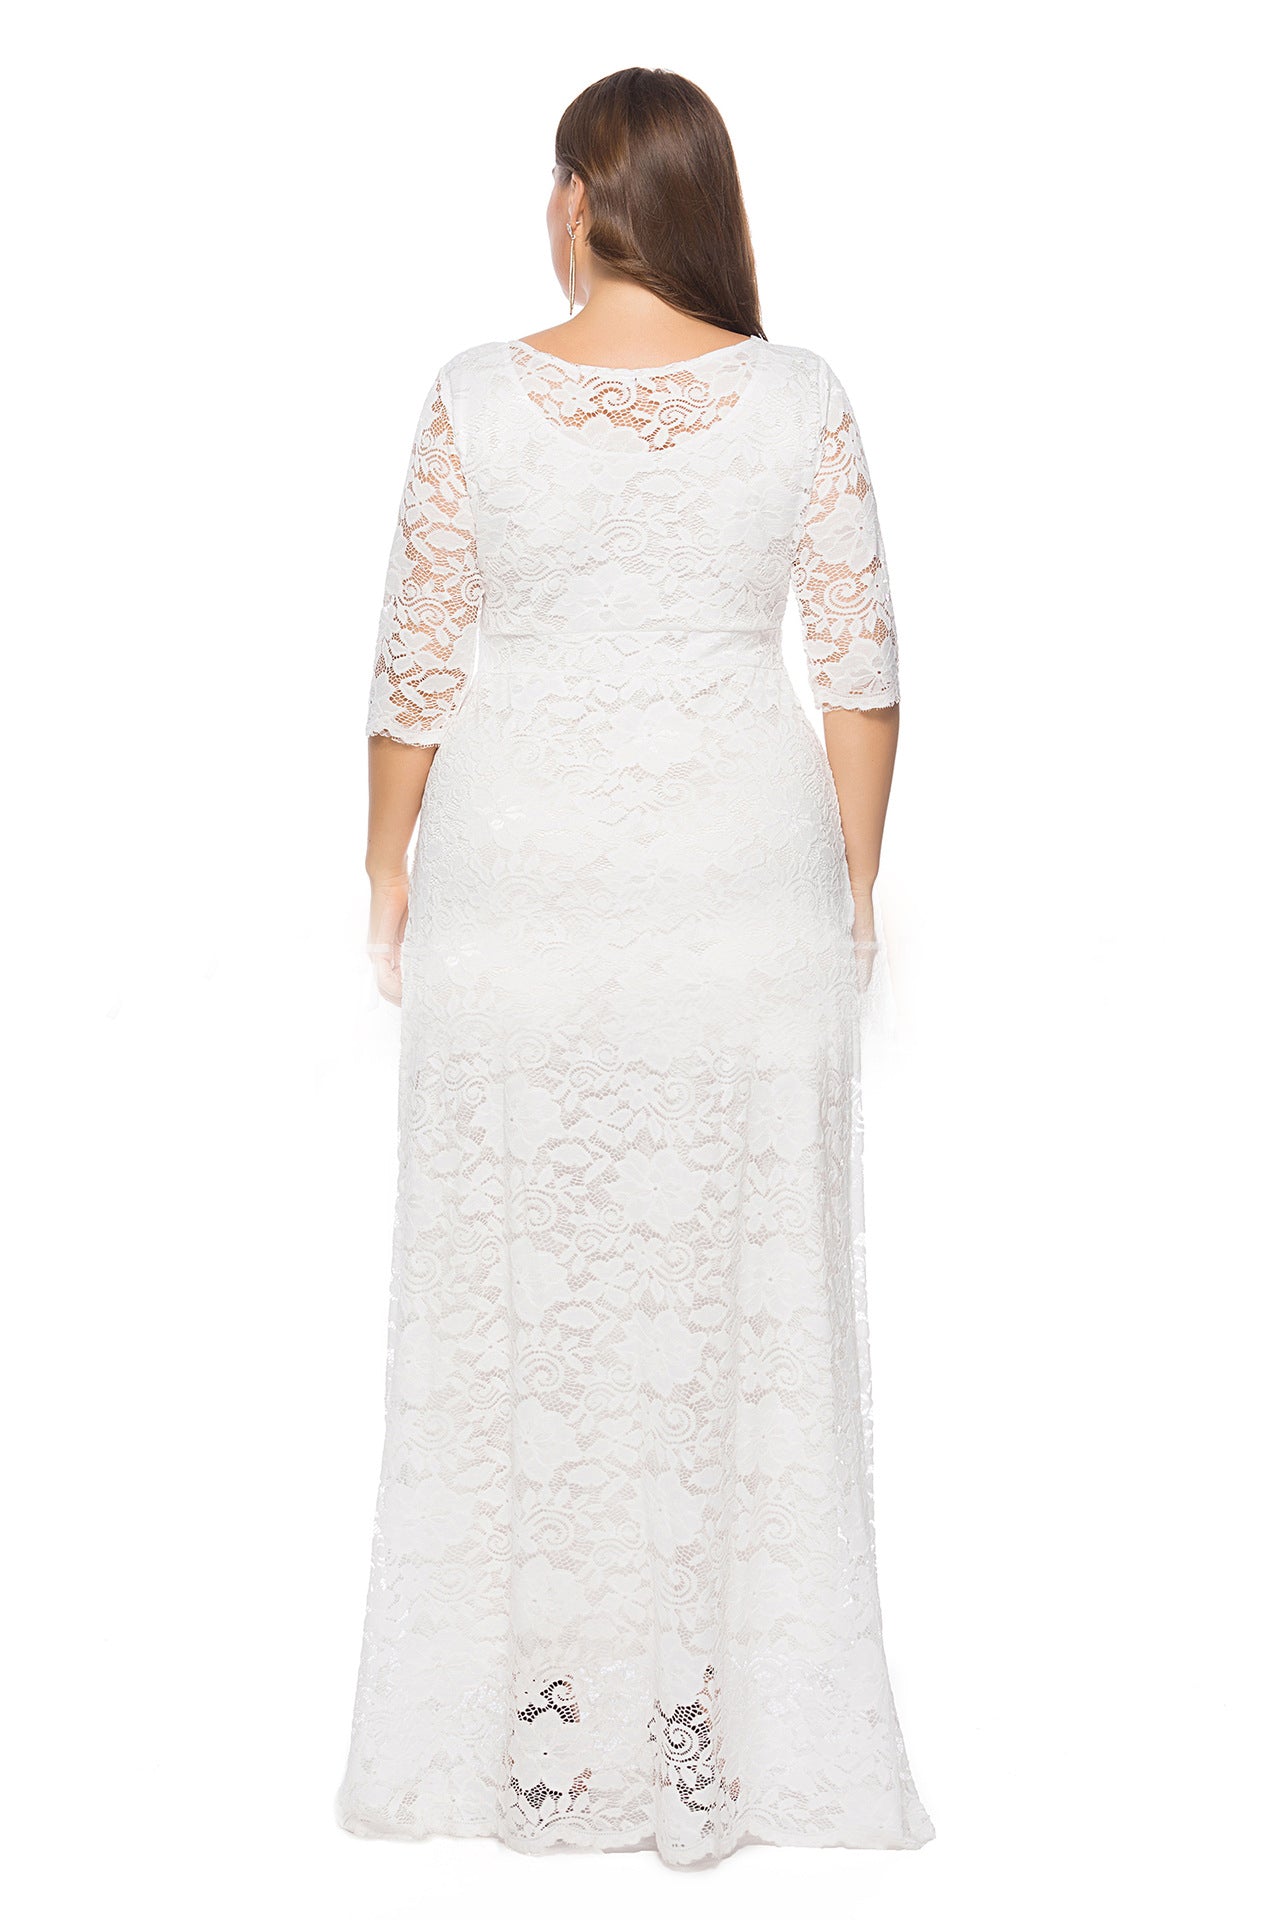 1/2 Sleeves Scoop Neck Lace Long Plus Size Mother of the Bride Dresses ...